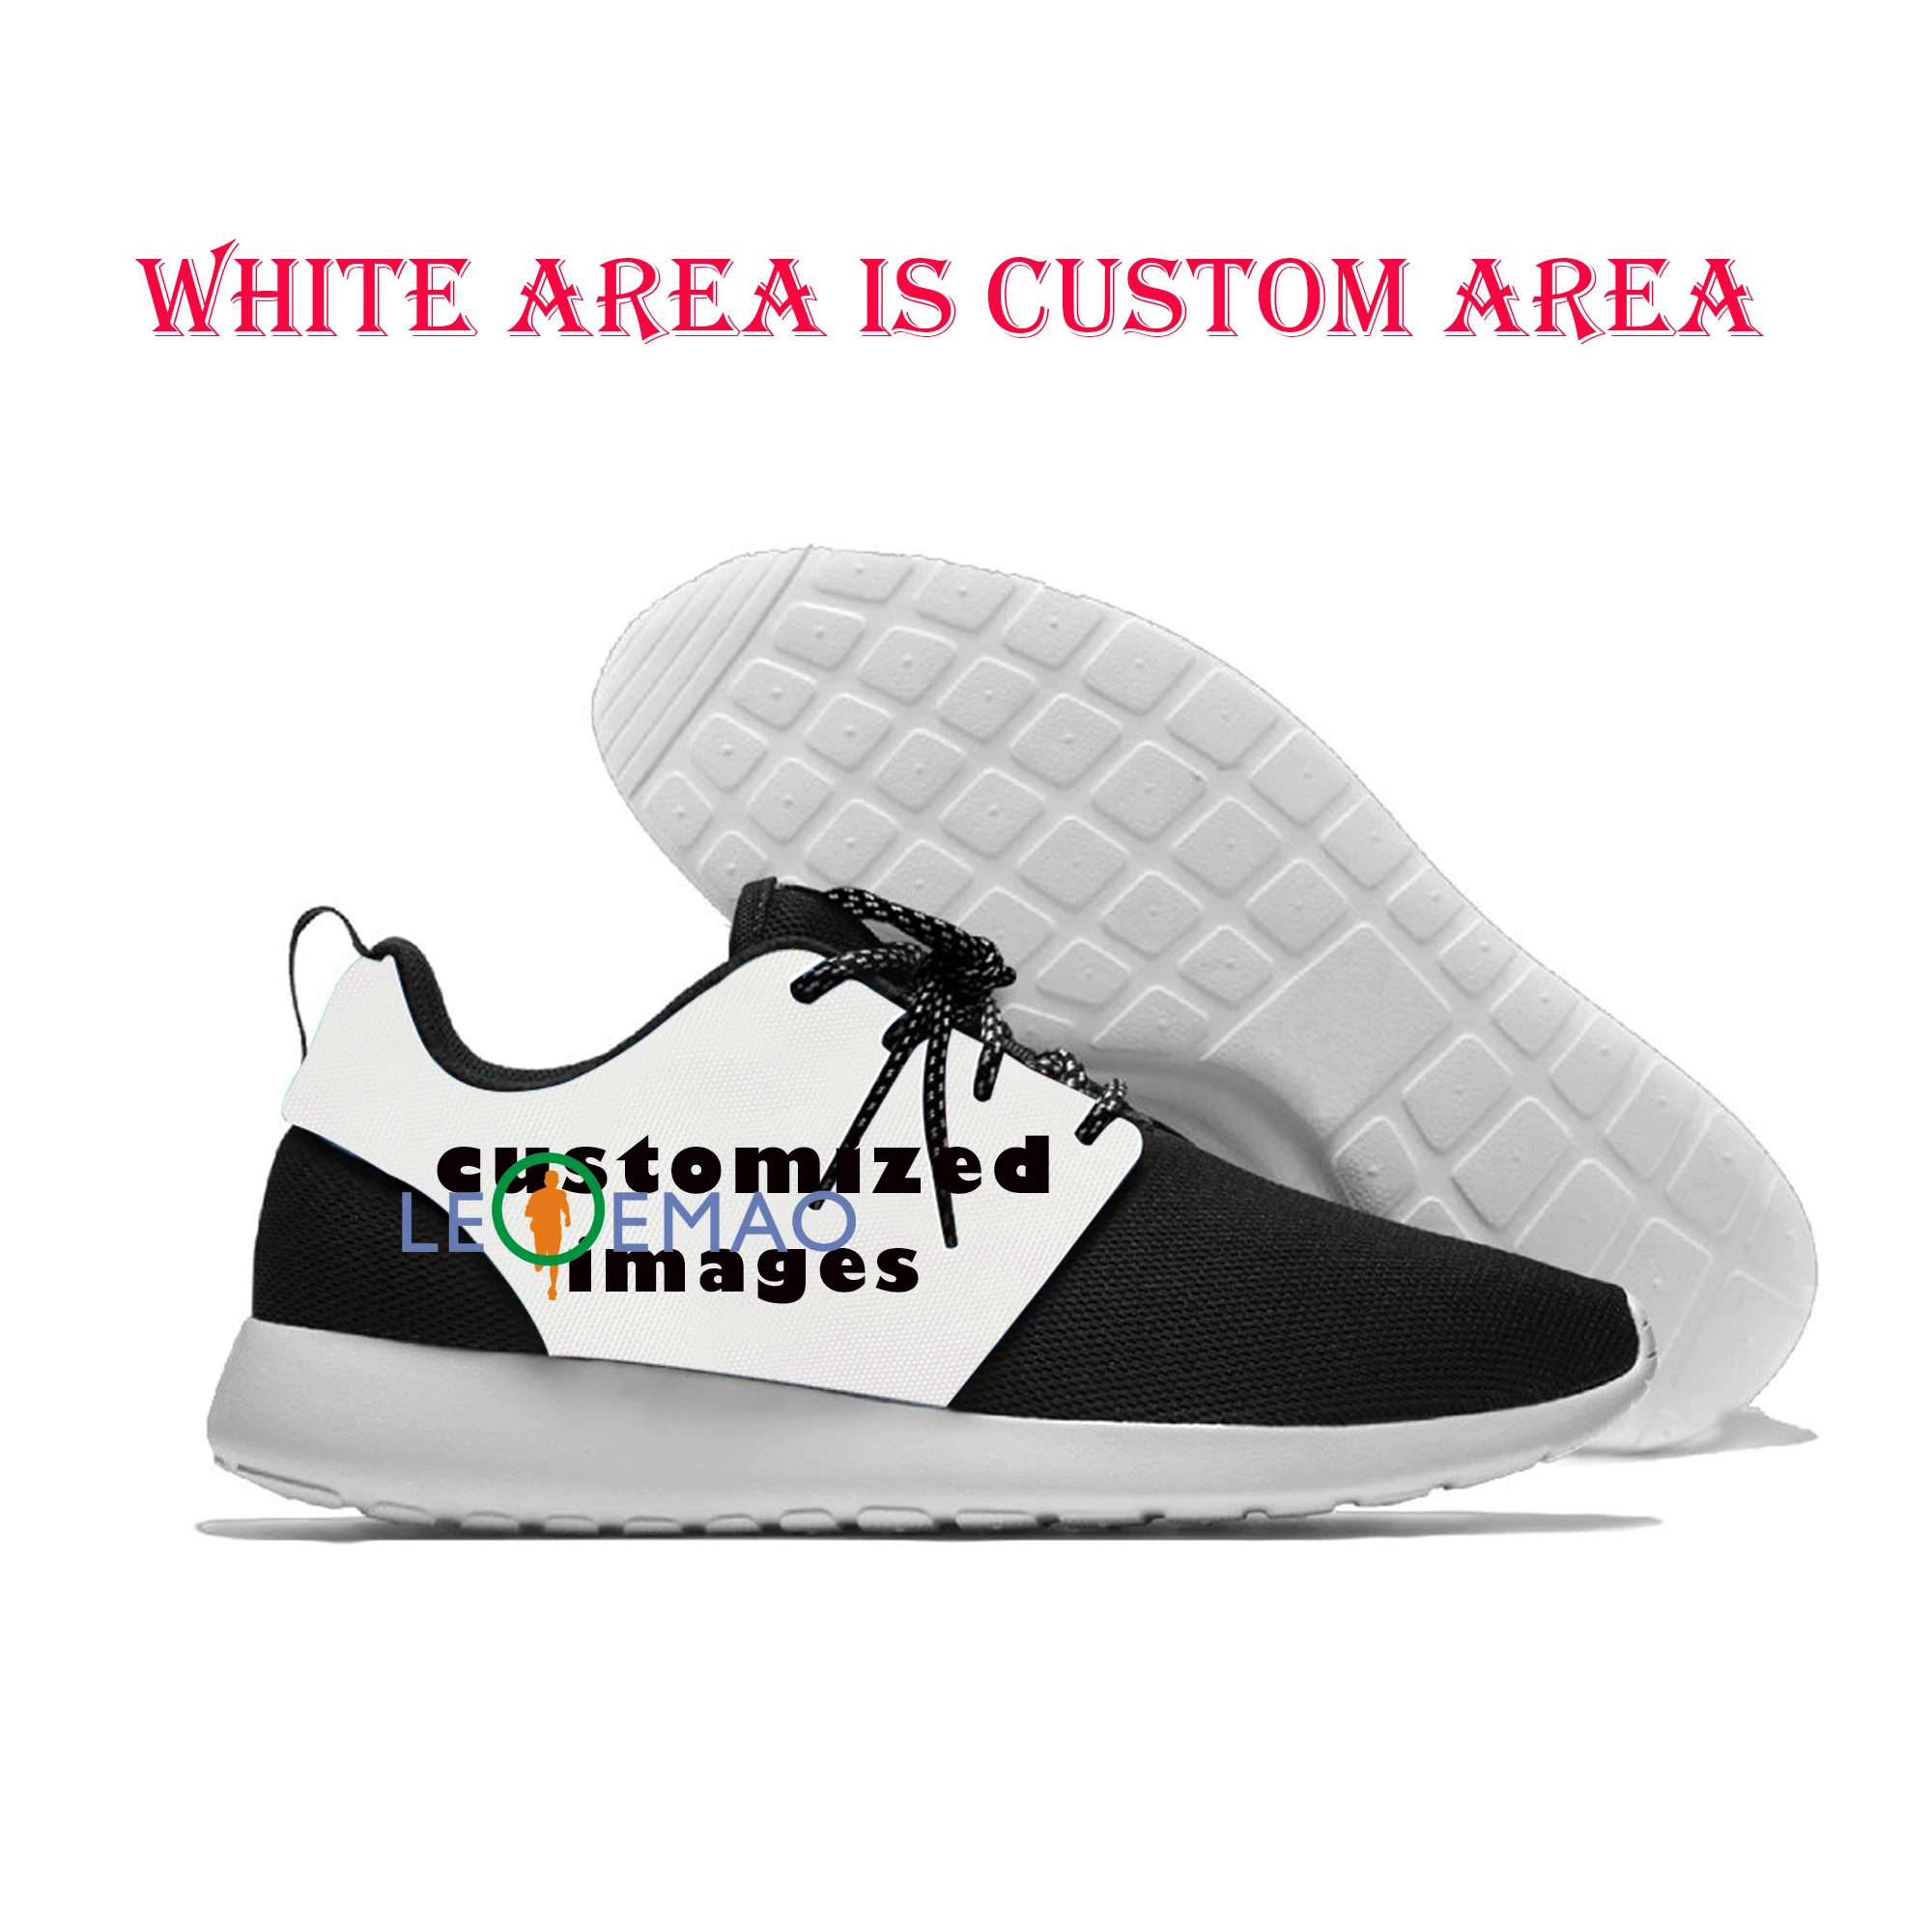 

Free Running Latest Cartoon High Quality Jolly Roger Skull & Crossbones Pirate Flag Shoes Jogging Athietic Breathable Sneakers